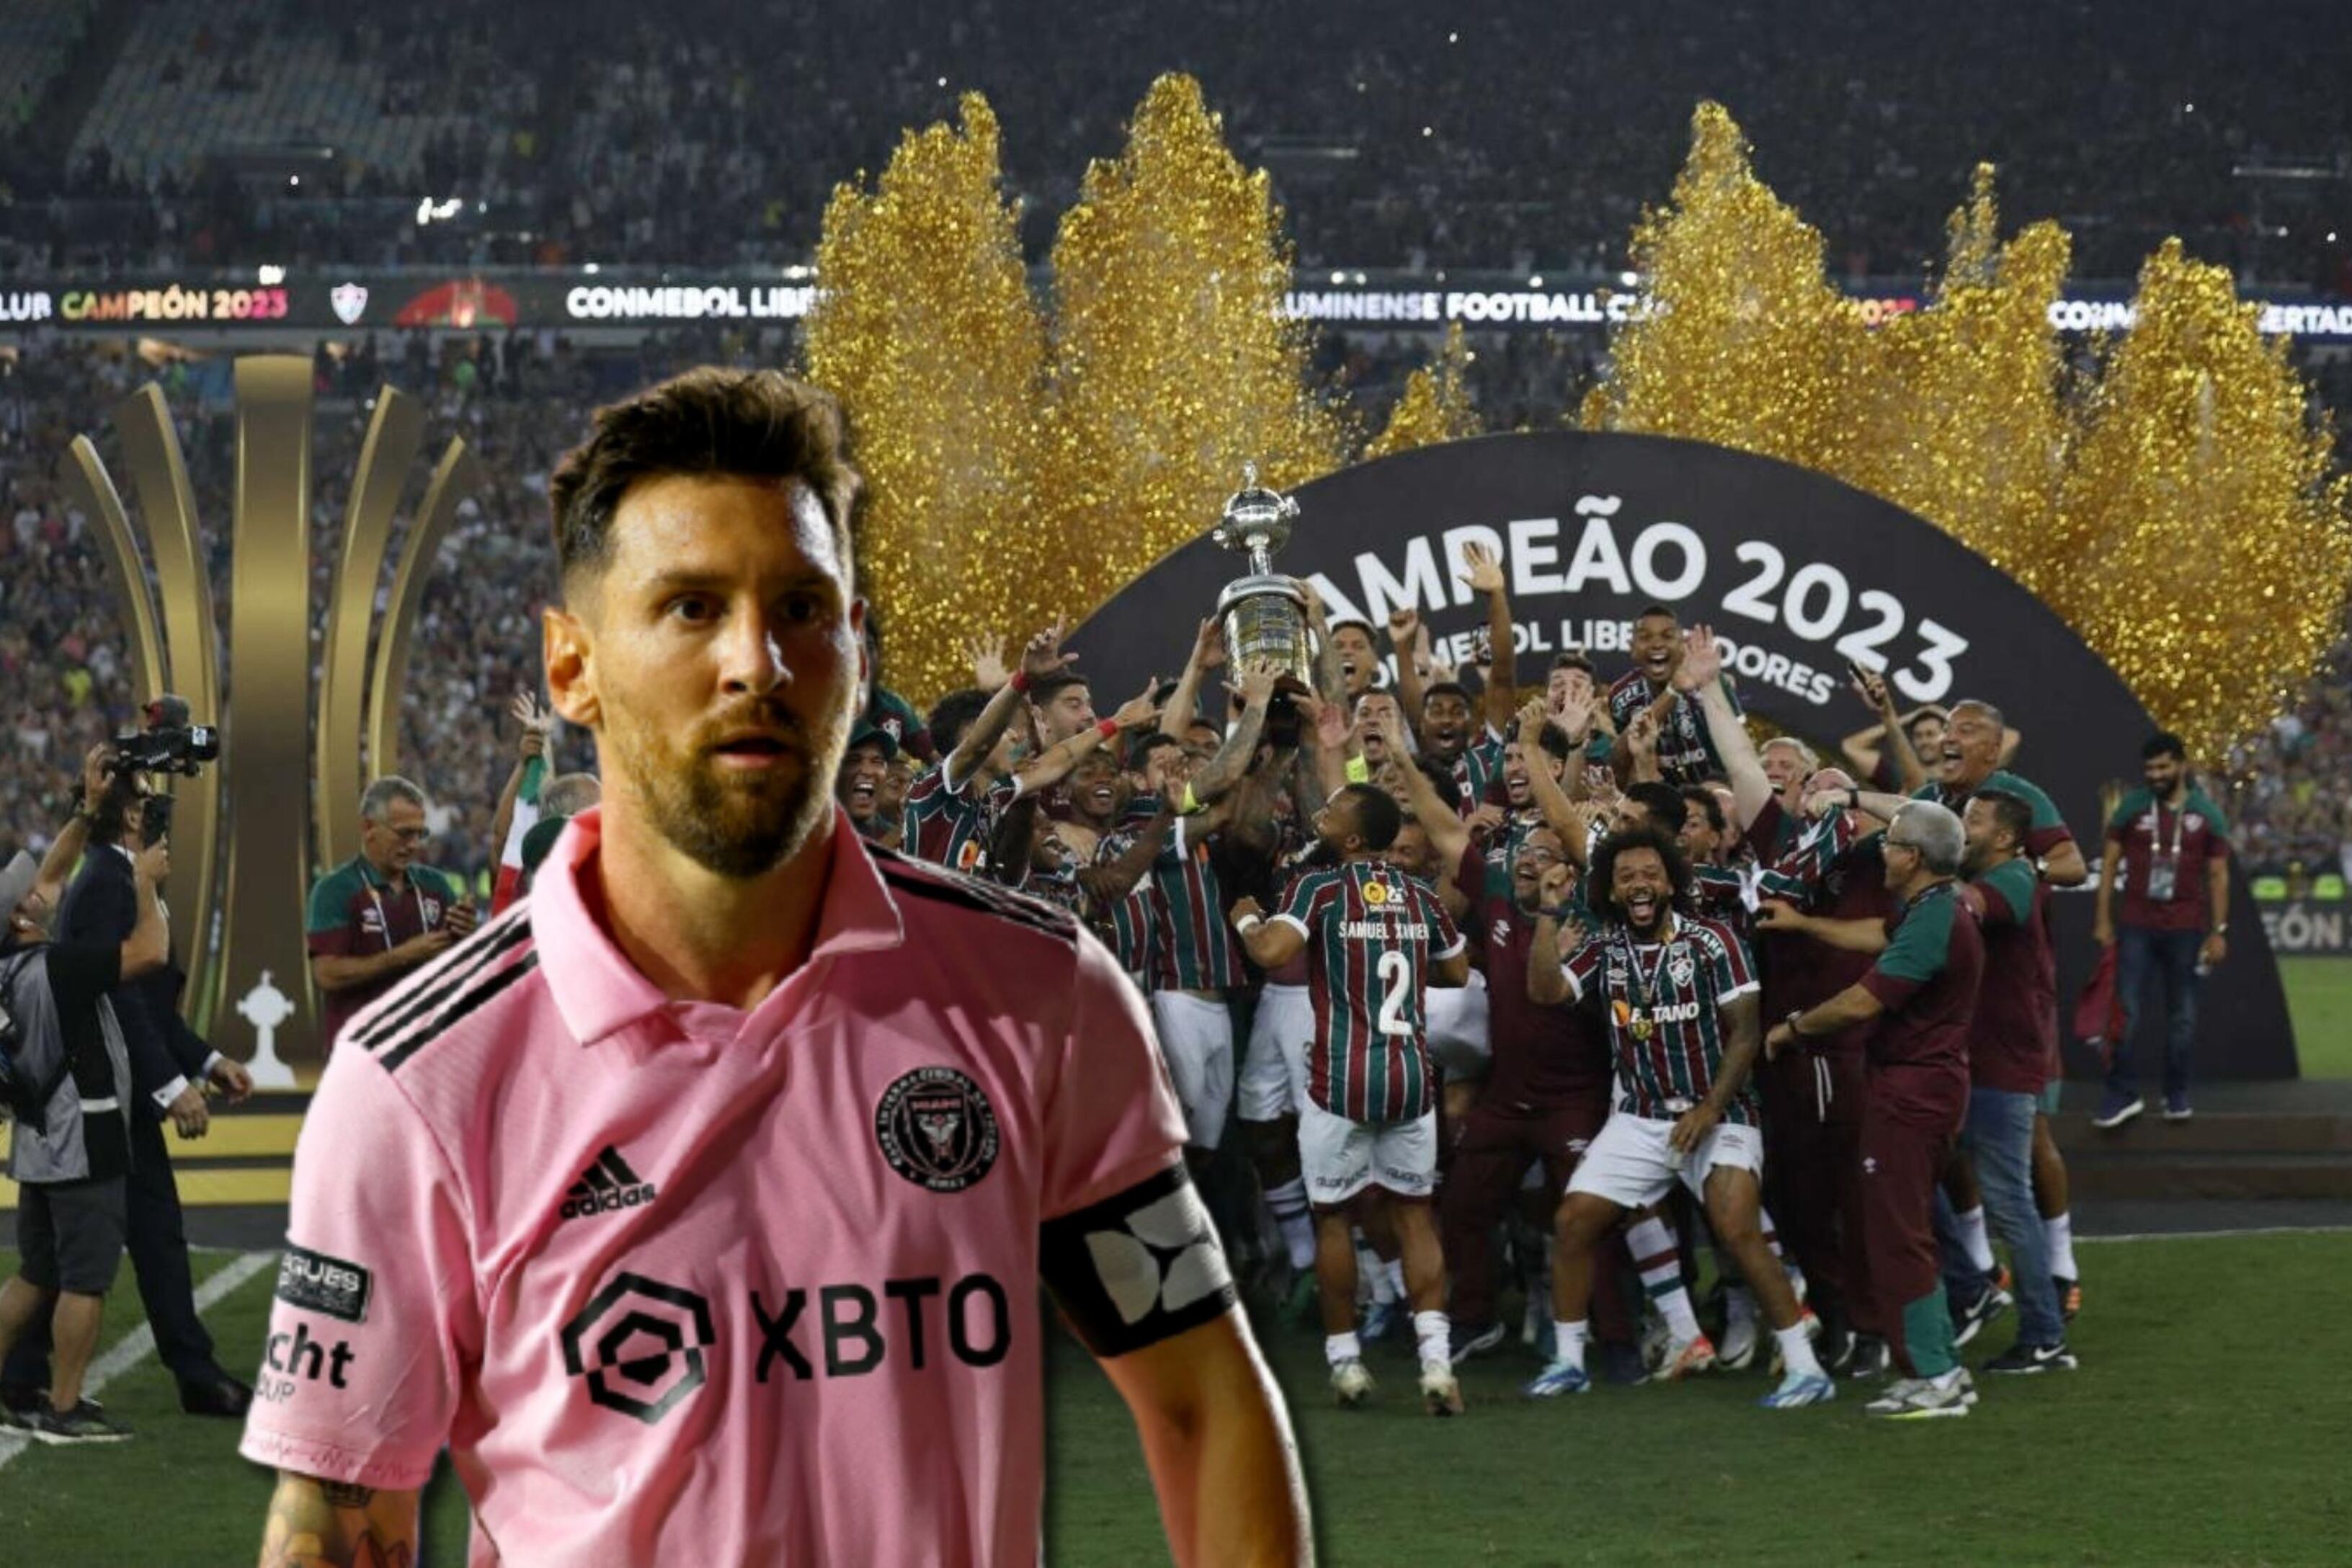 While Messi earns 50 million, what Fluminense received with the Libertadores win